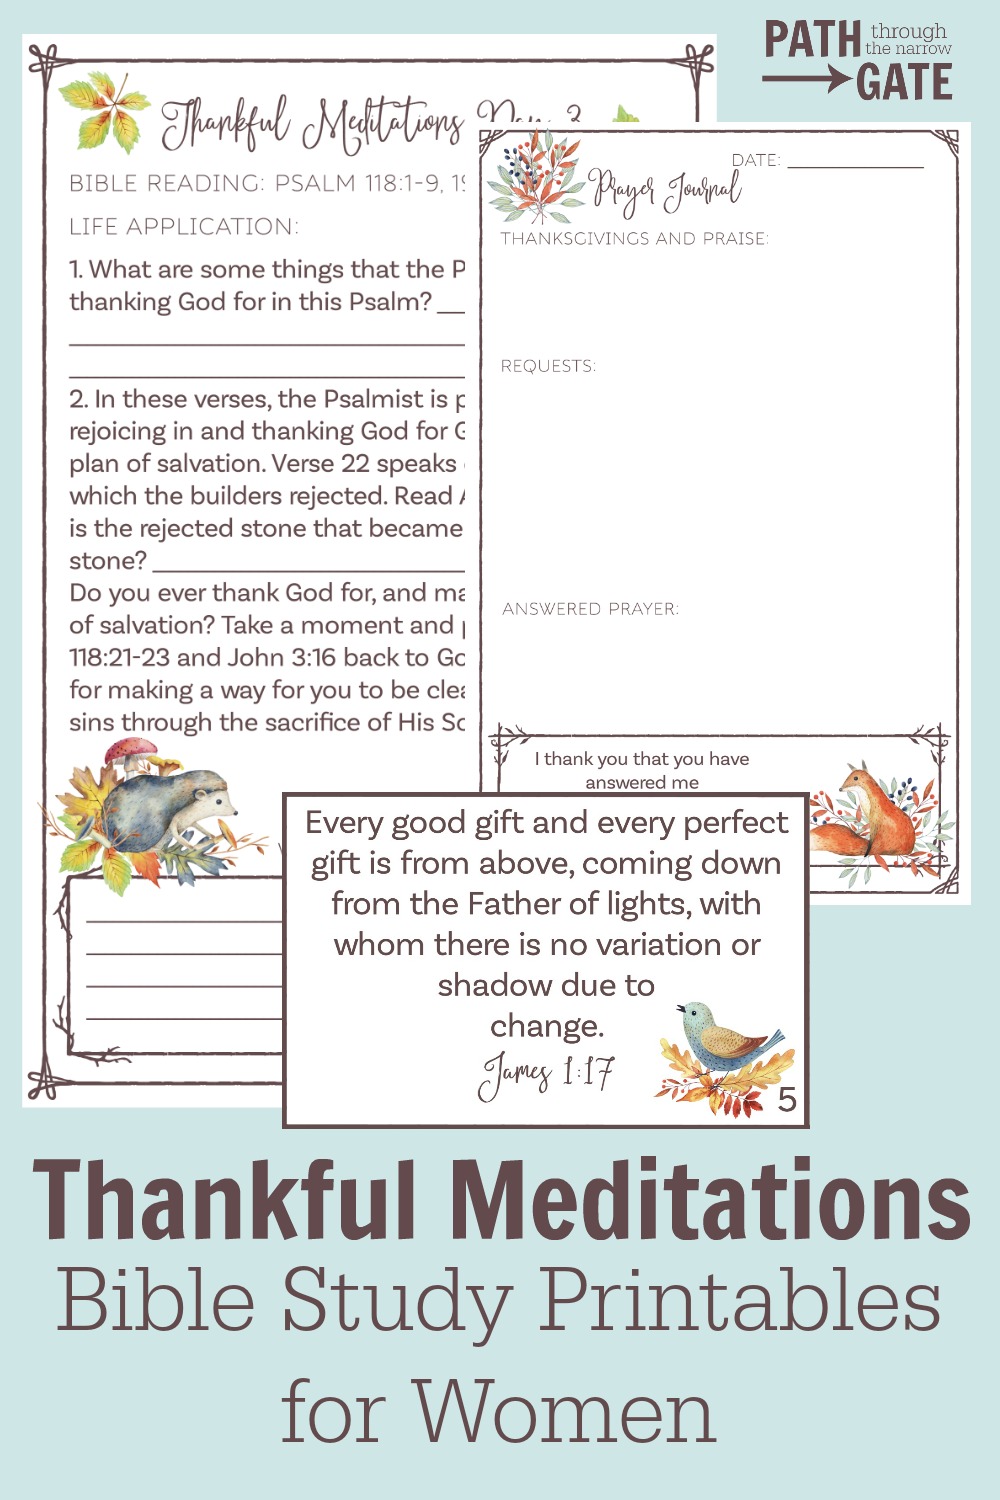 Do you long to pause and give God the worship and thanks He so richly deserves? This Thankful Meditations Bible Study Pack will help you do just that!